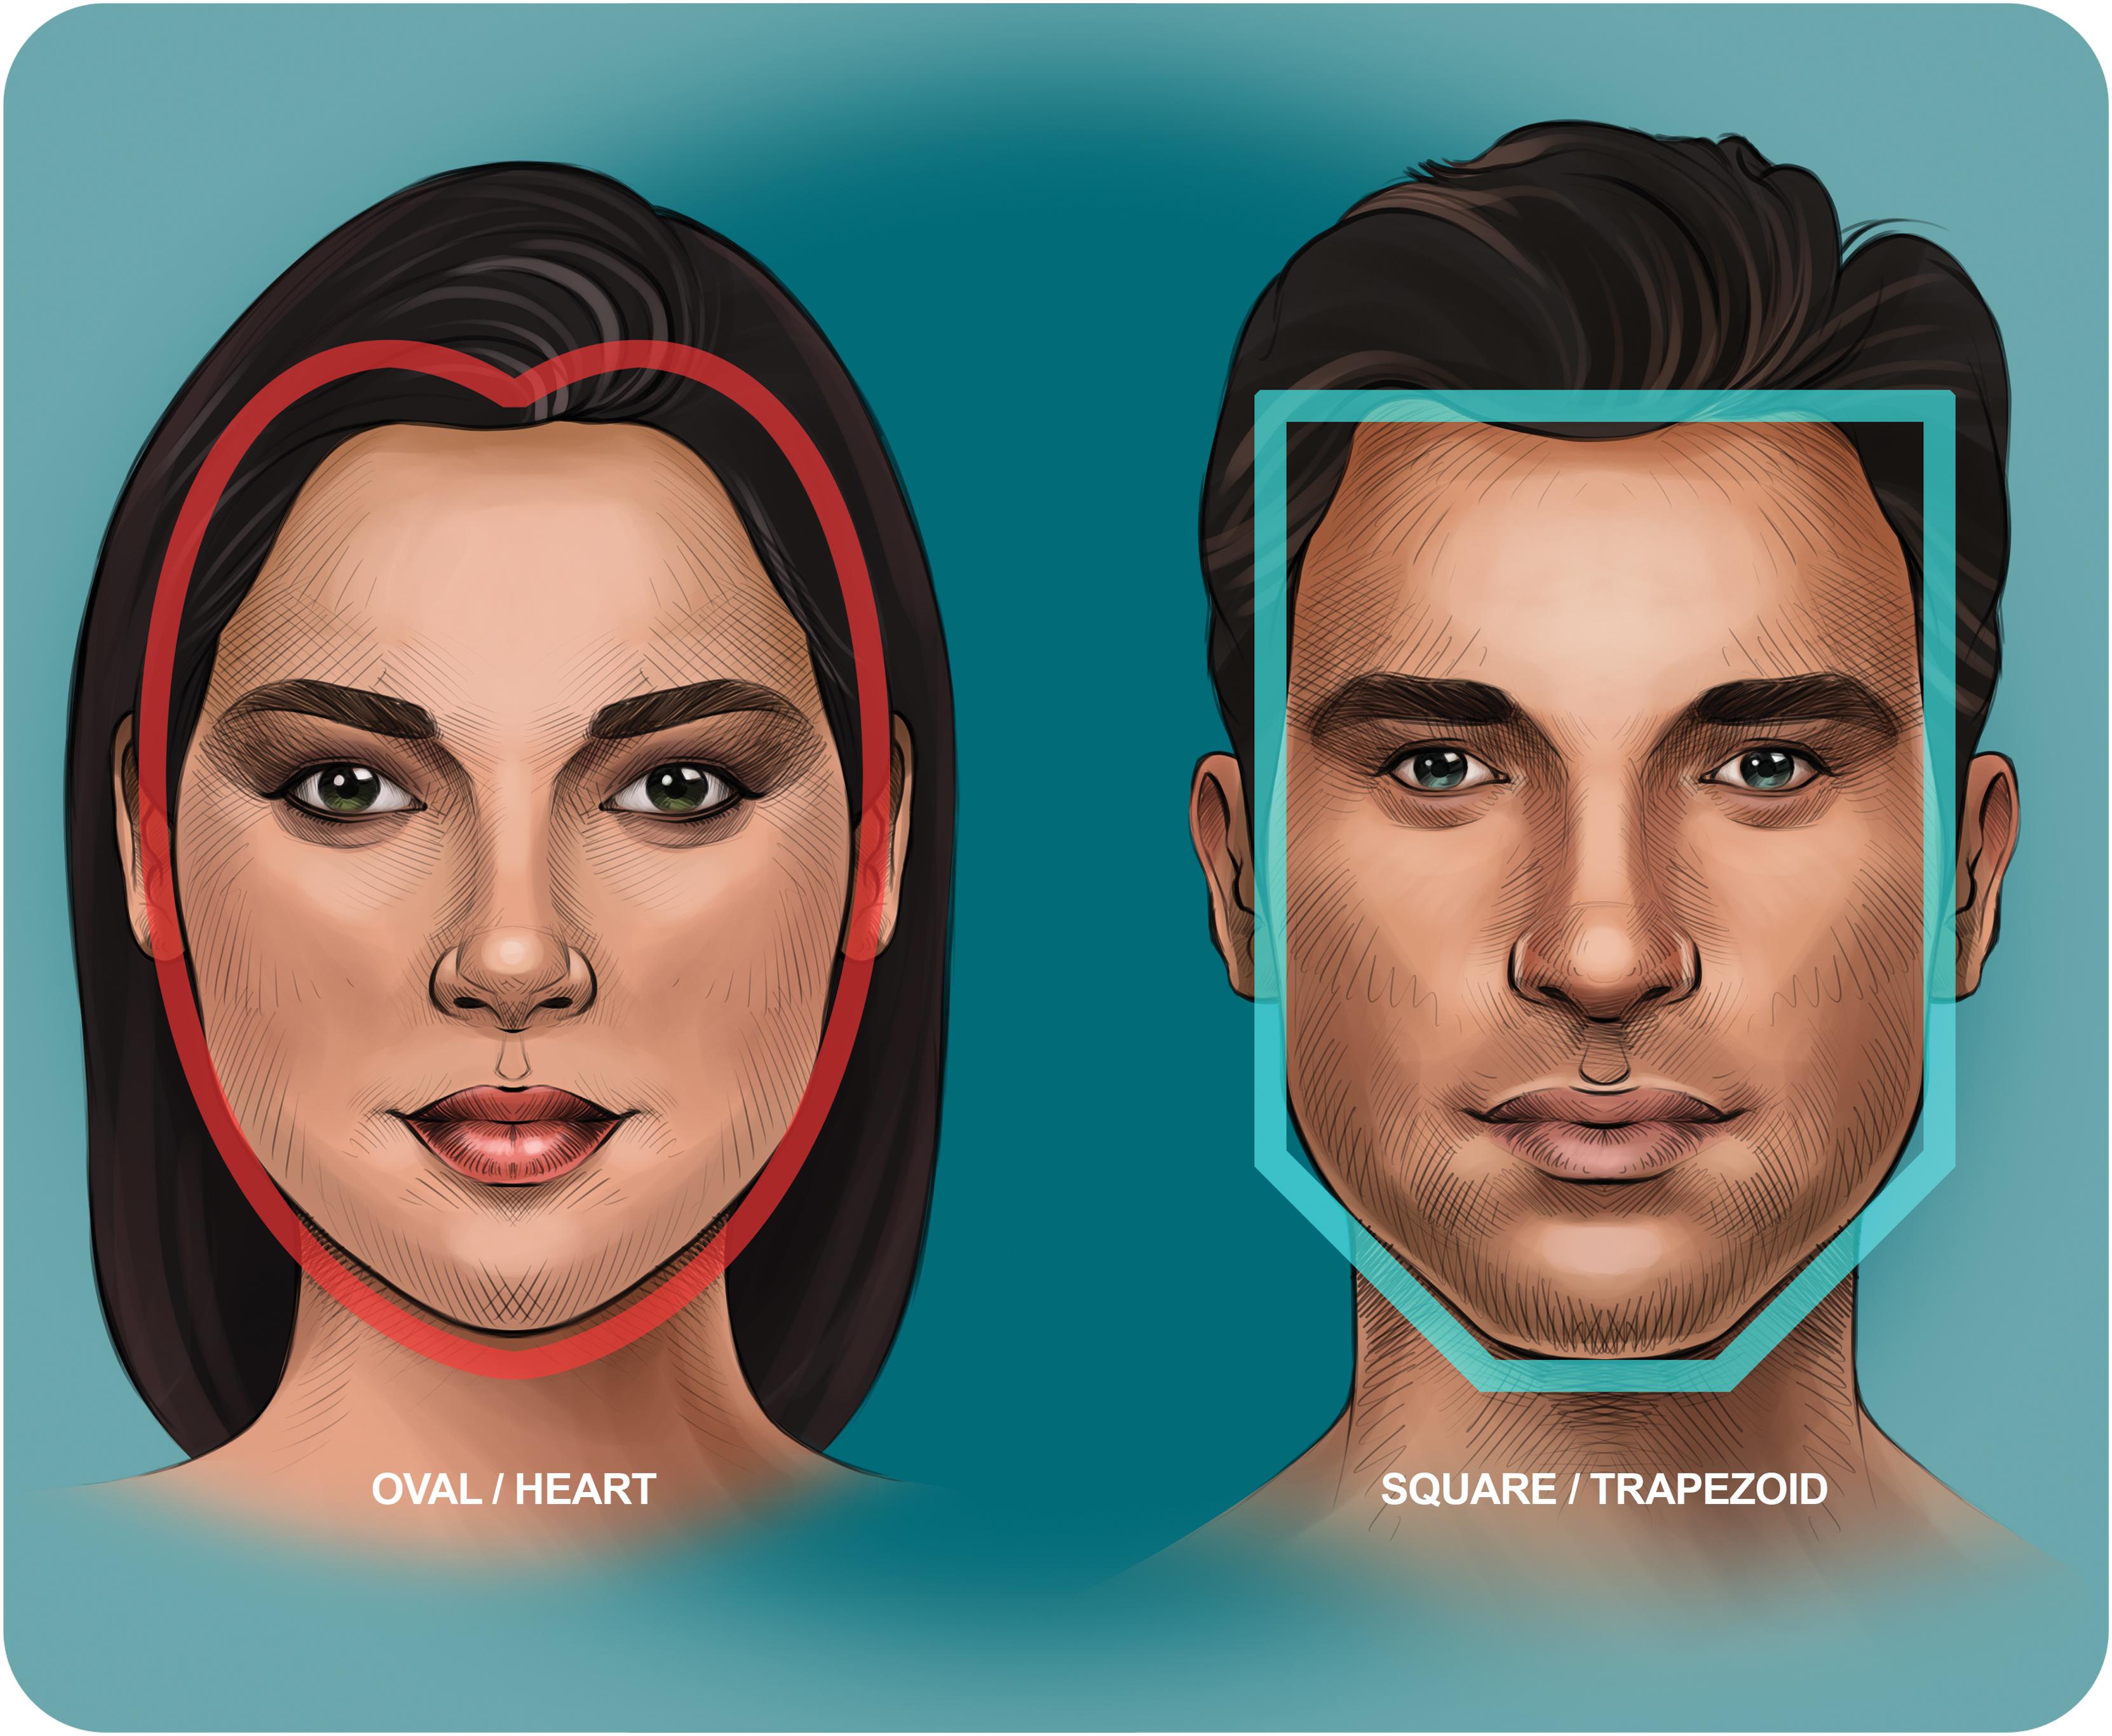 Fig. 10.2, Facial shape differences in males and females. Females are more oval and heart shaped and males are more square and trapezoid.